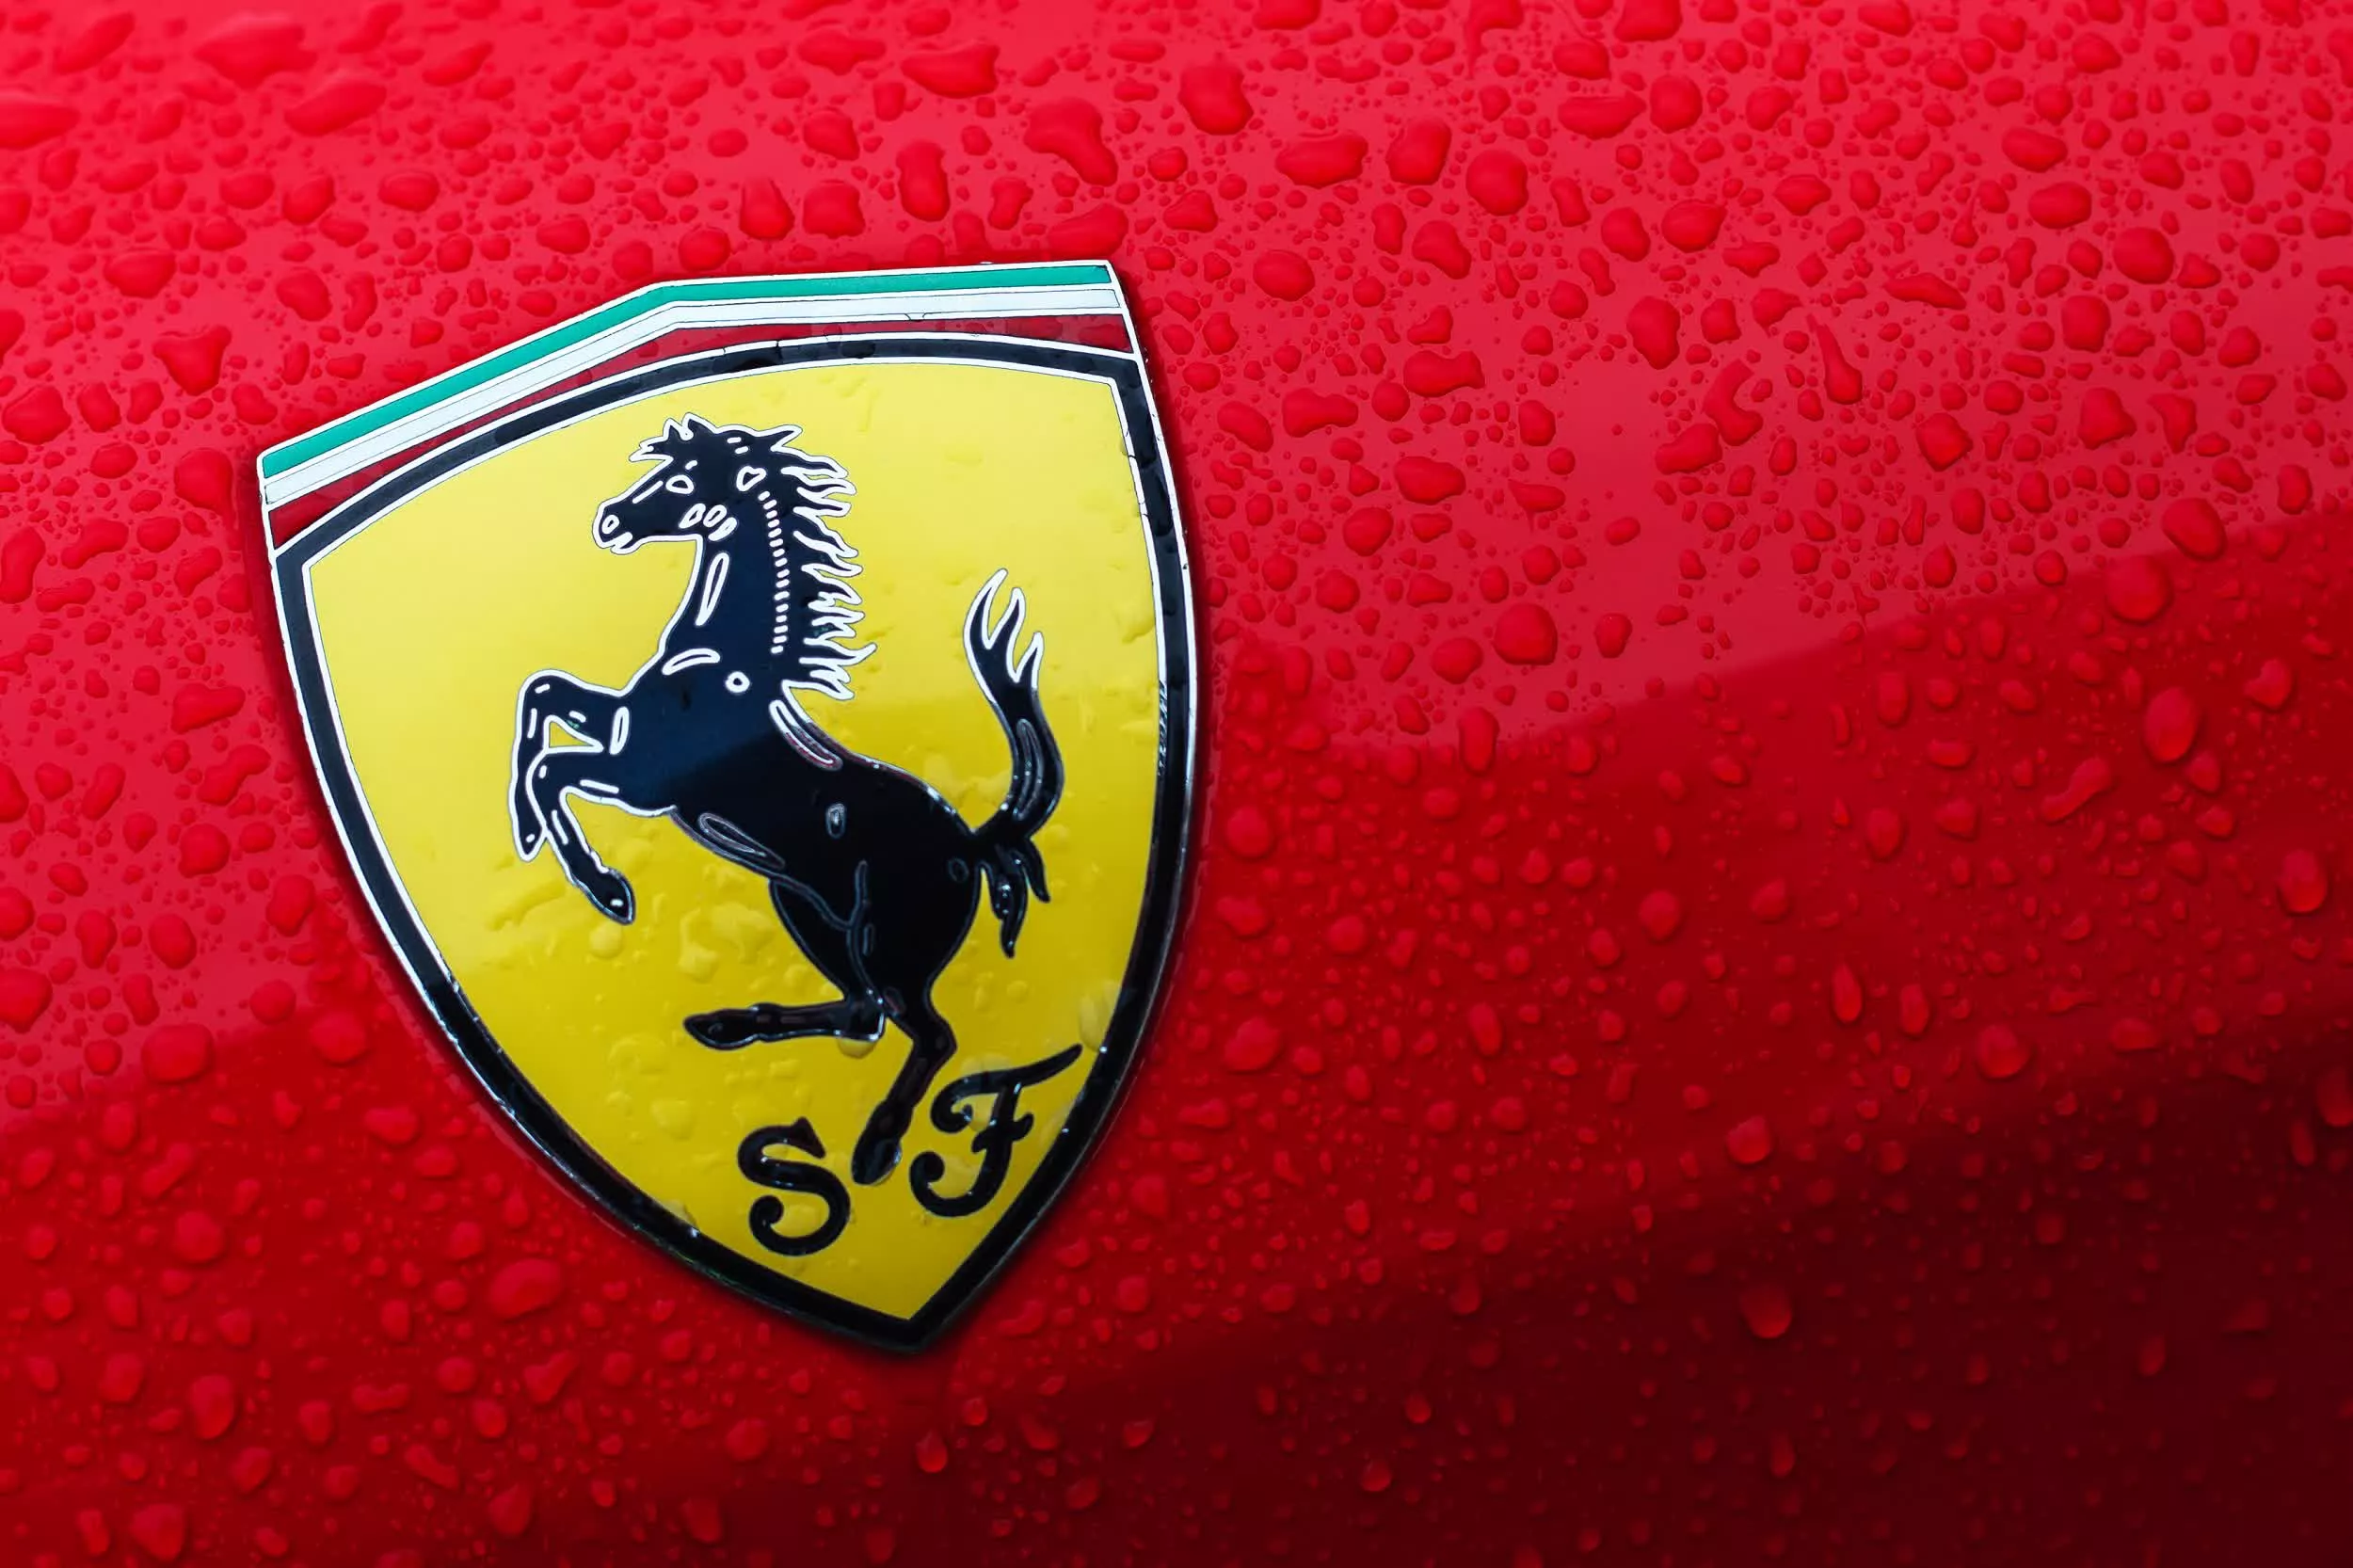 The first all-electric Ferrari will be ready by 2025